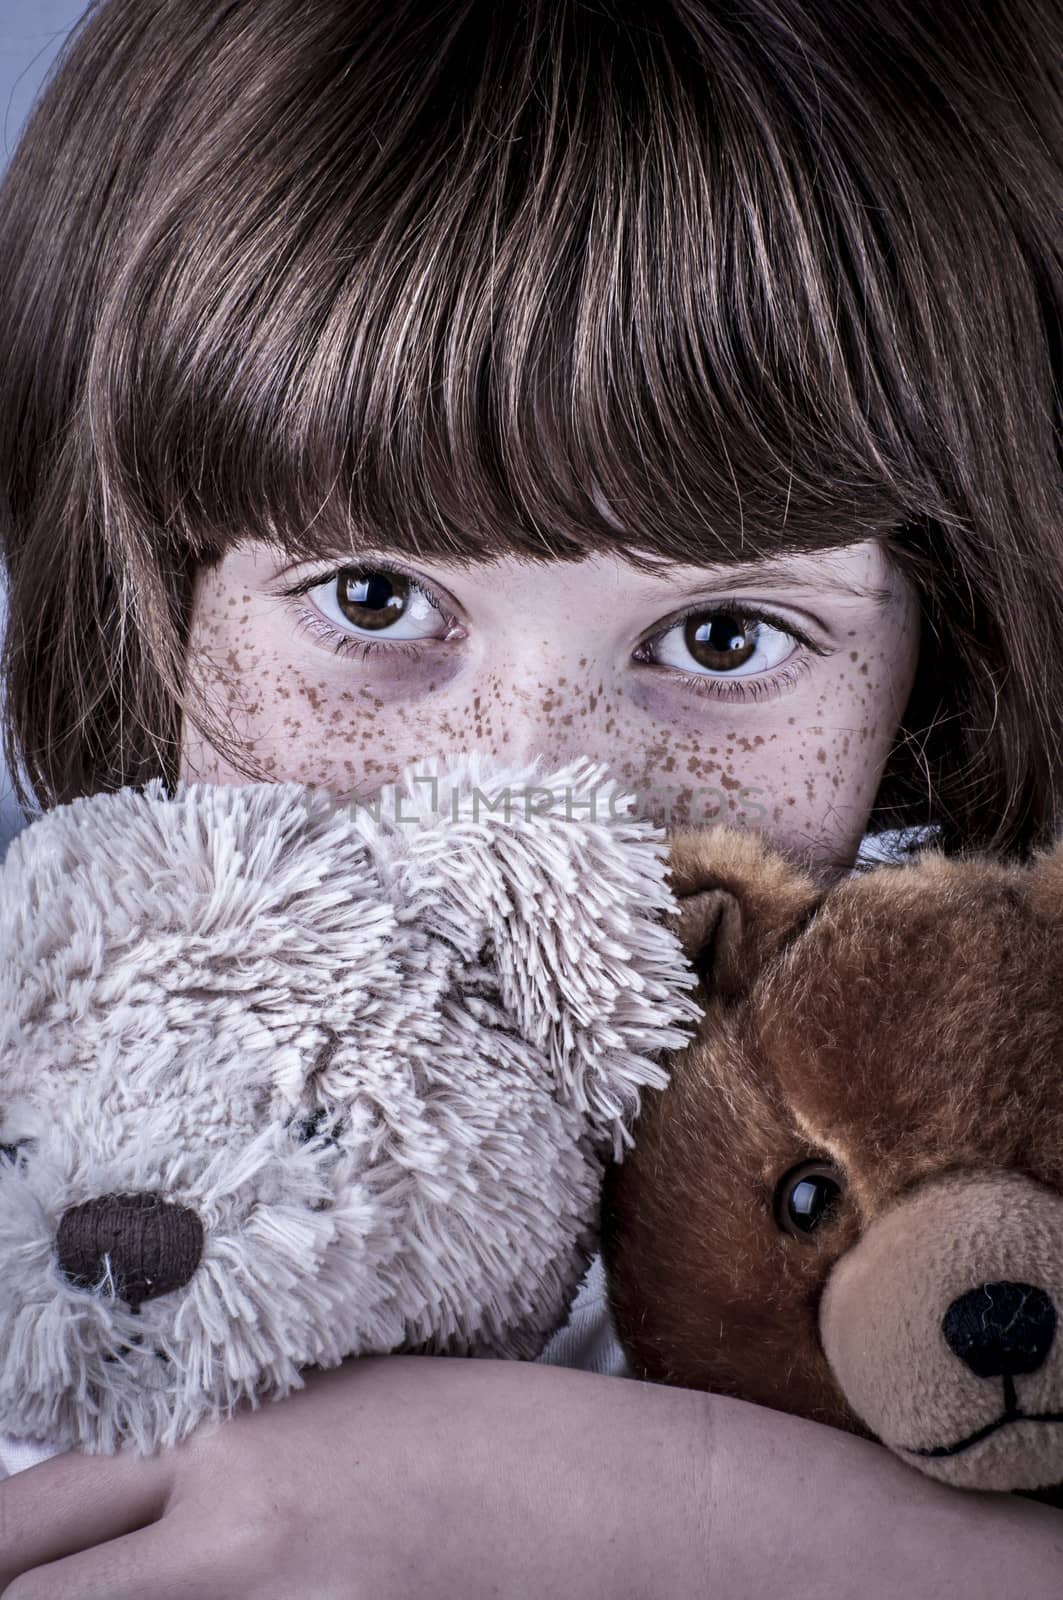 girl with freckles and two stuffed animals, teddy bears